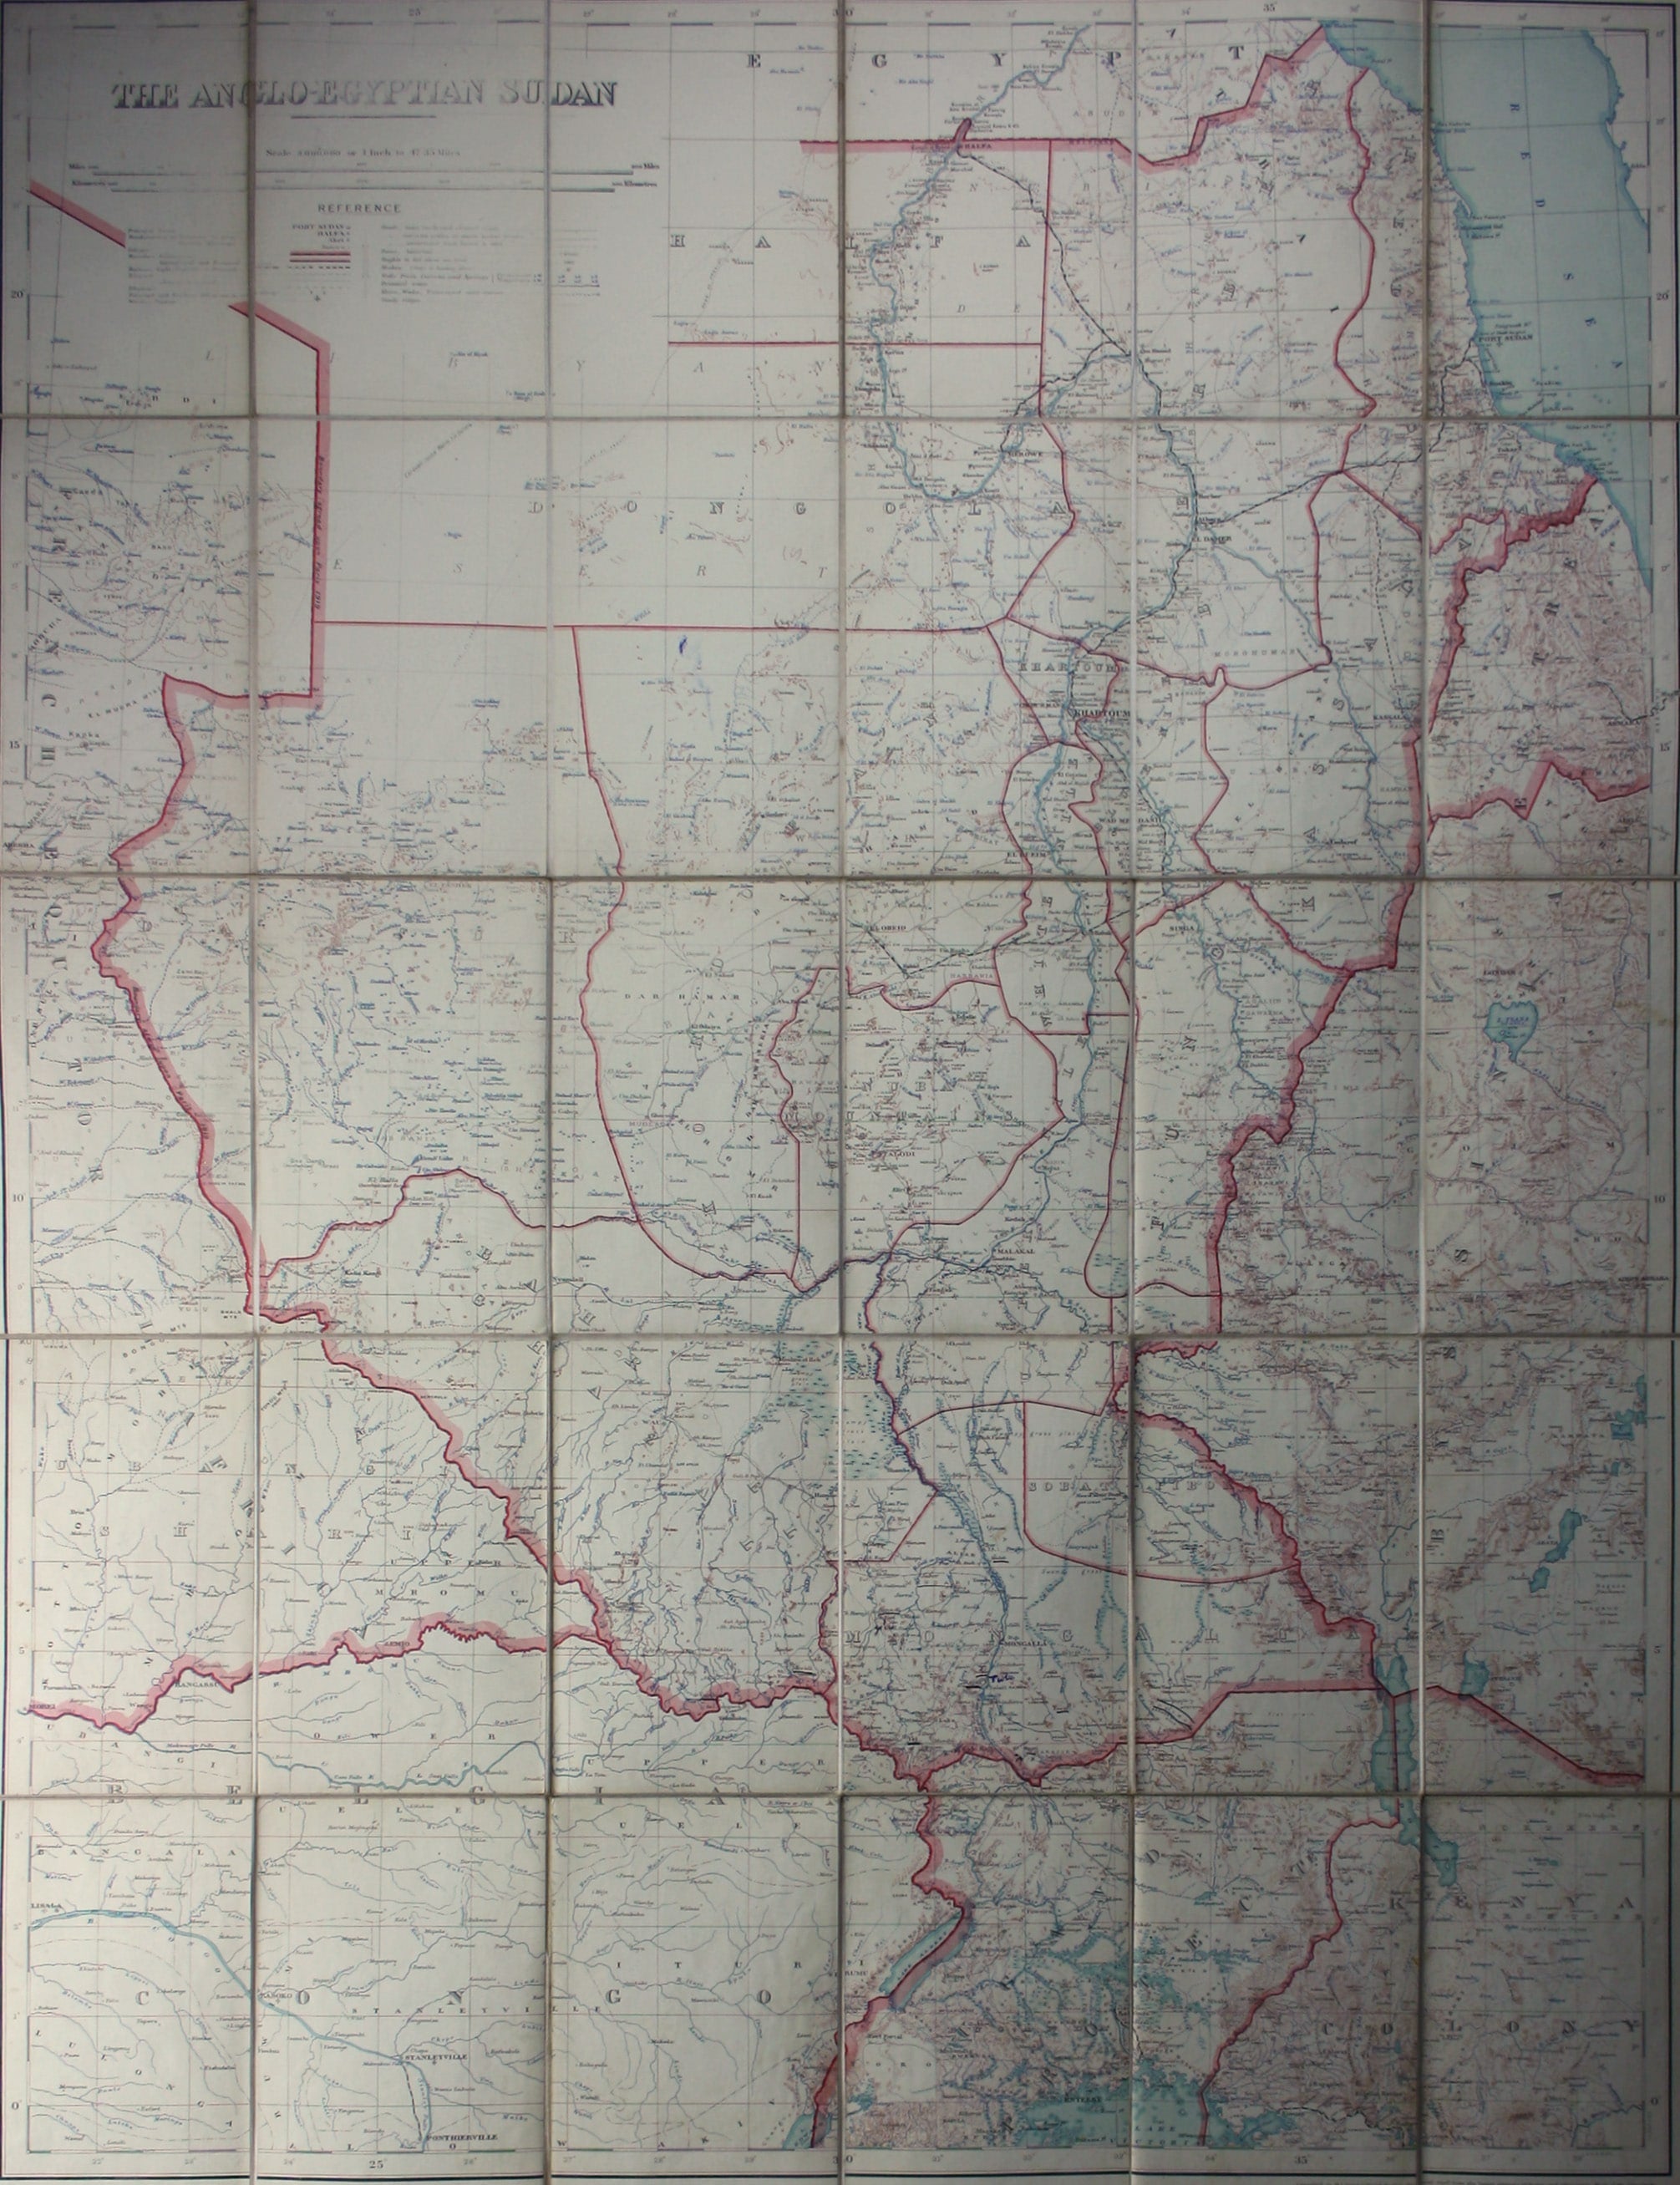 War Office Map of Anglo-Egyptian Sudan